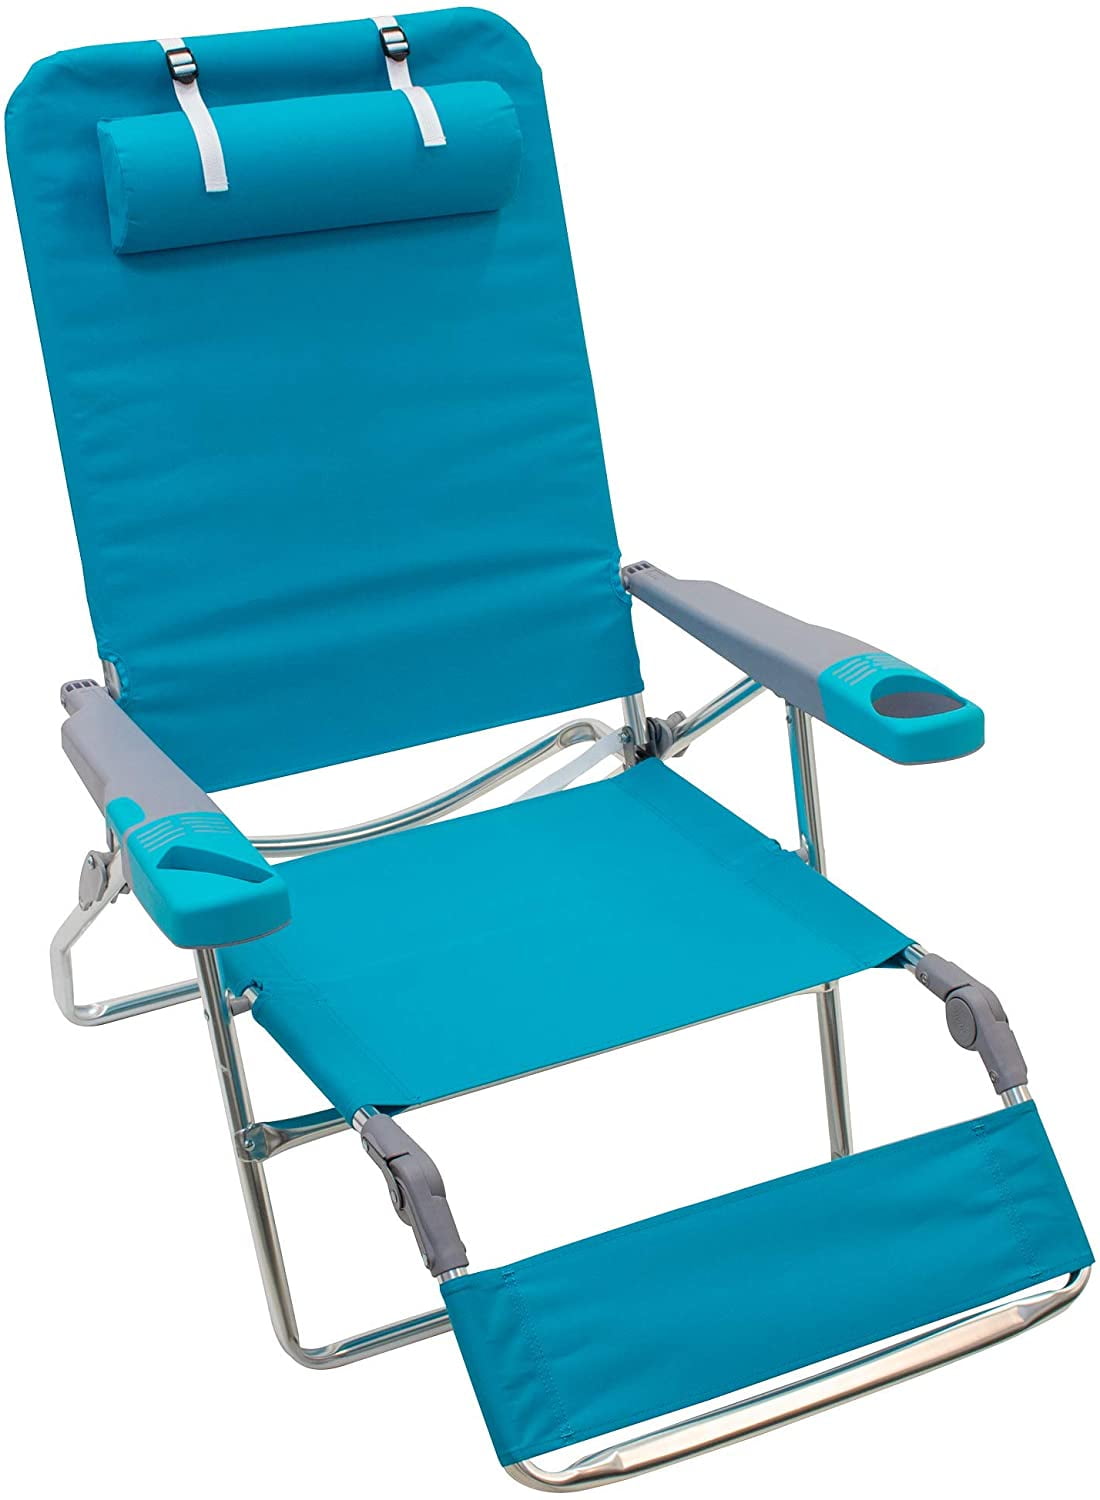 ARROWHEAD OUTDOOR Portable Folding Camping Quad Chair w/ 4-Can 